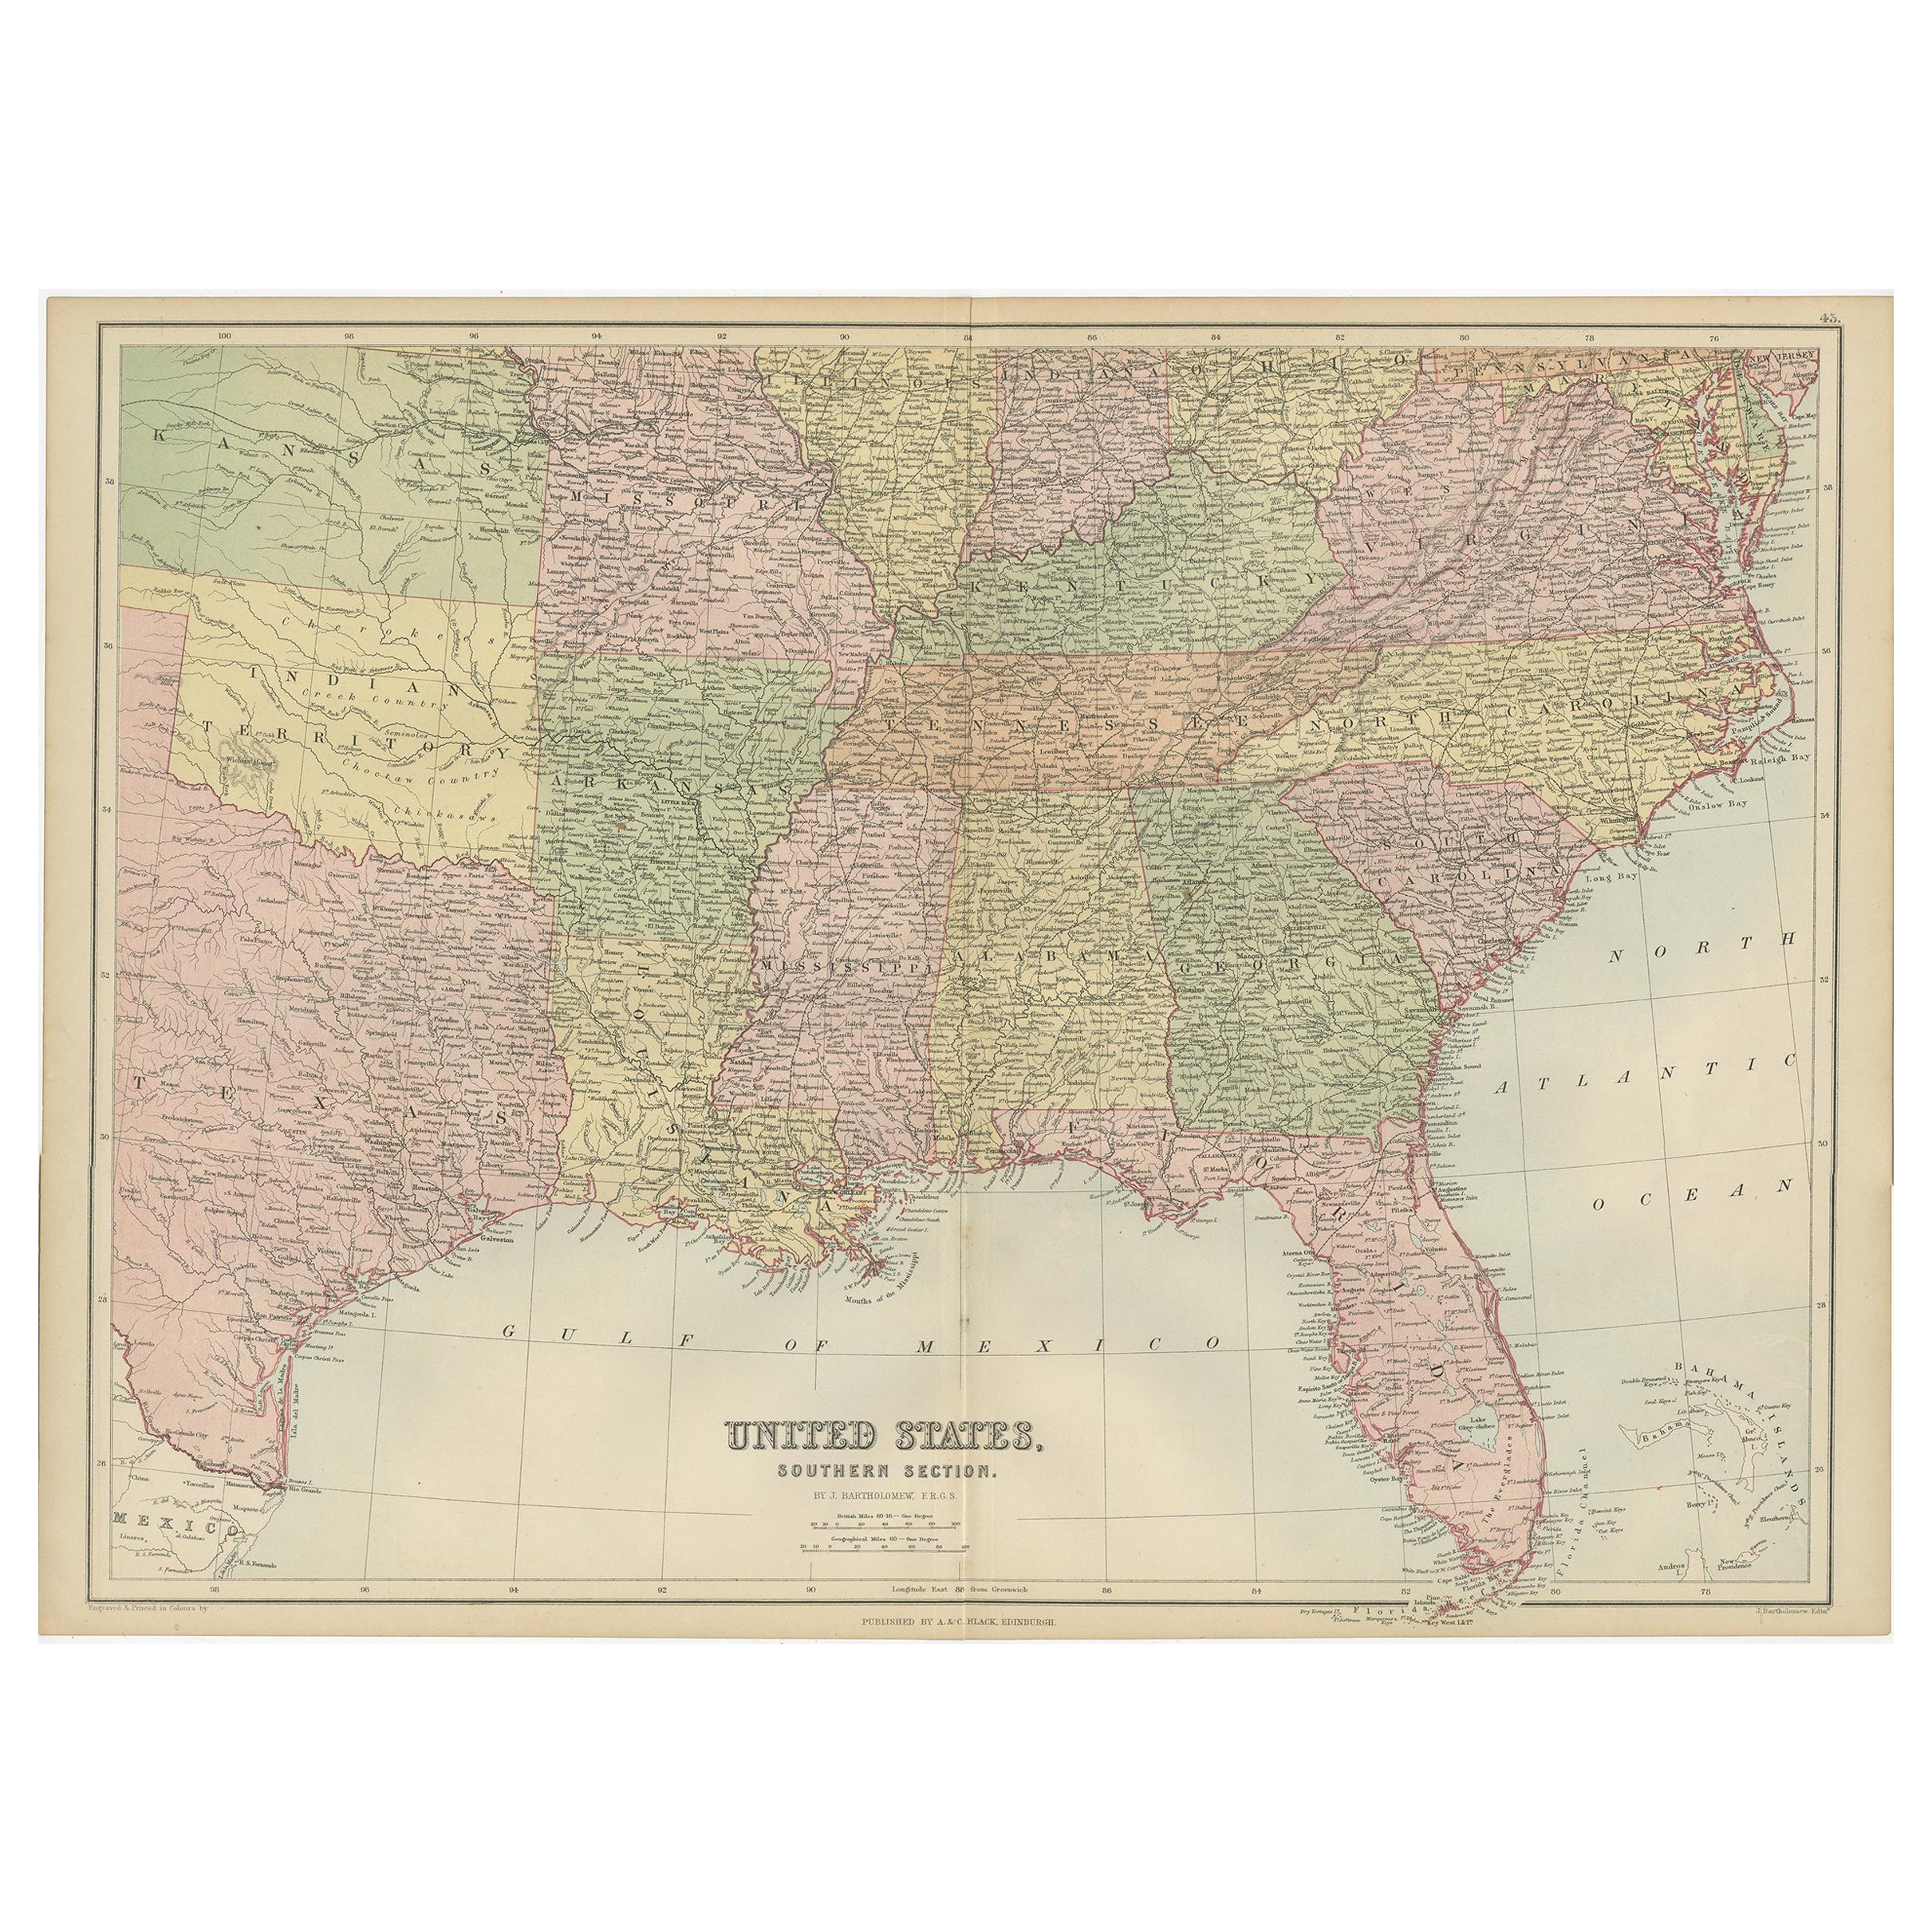 Antique Map of The United States Southern Section by A & C. Black, 1870